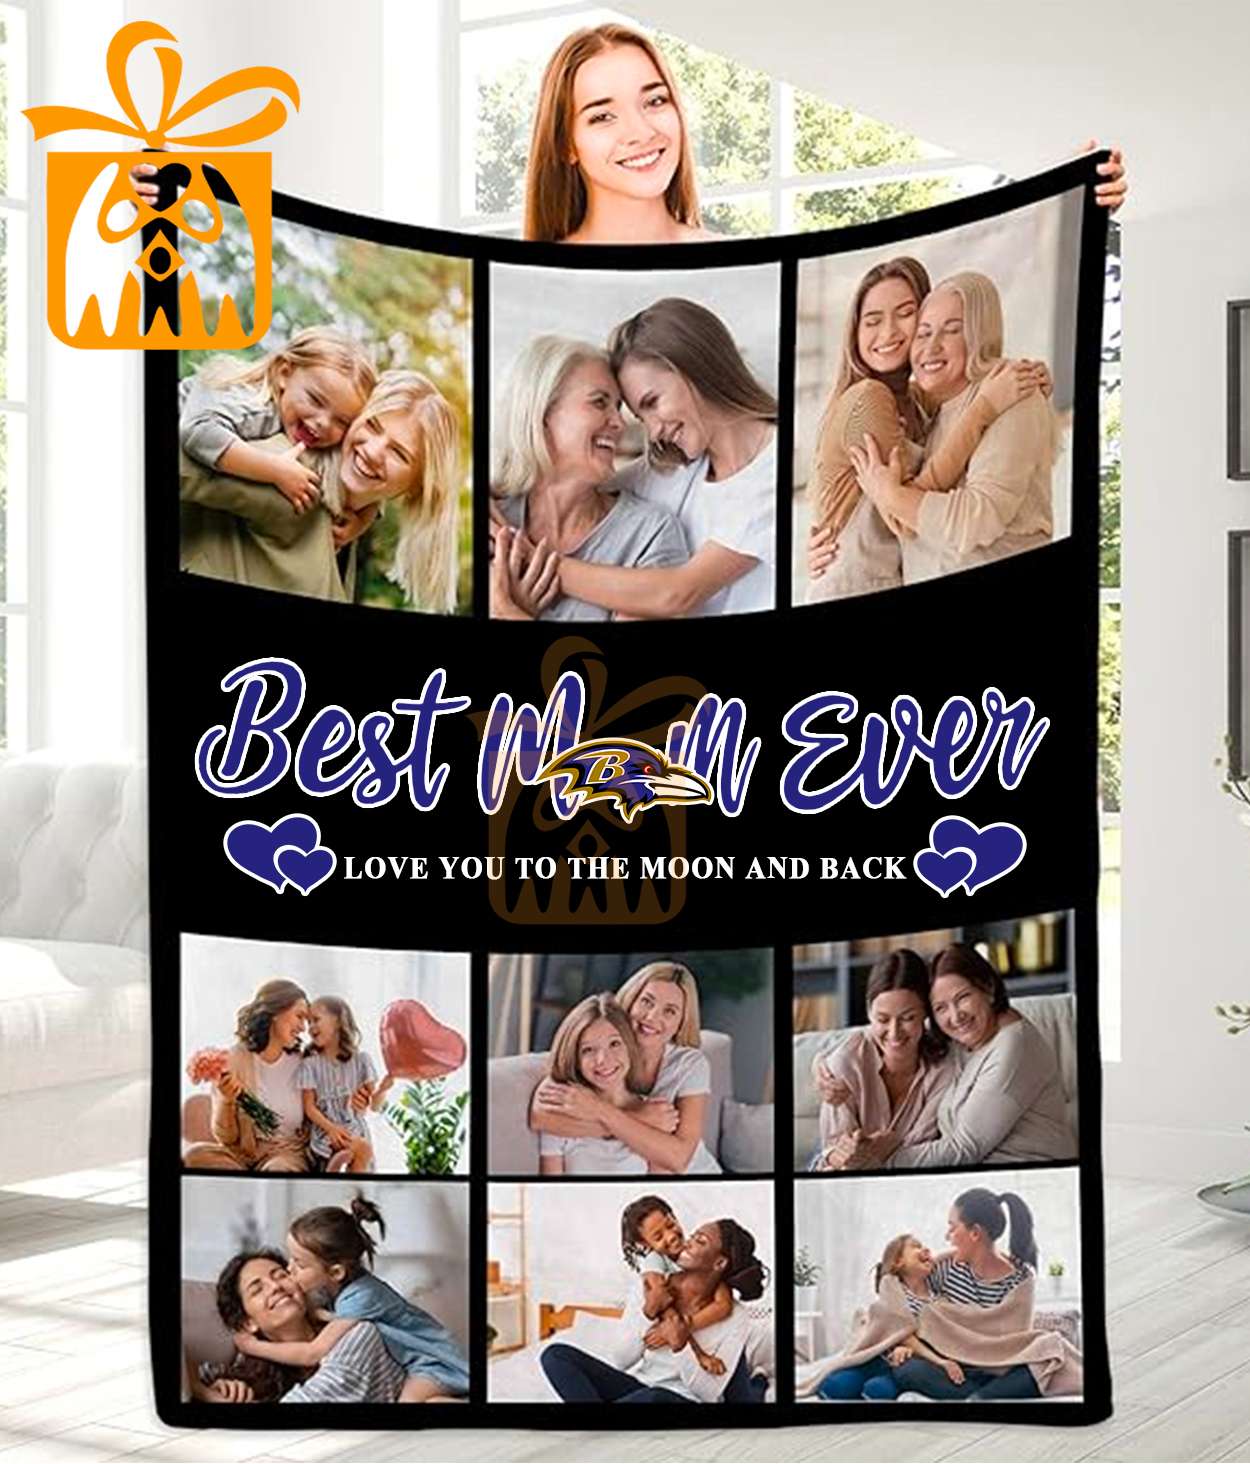 Best Mom Ever Custom NFL Baltimore Ravens Blankets with Pictures - Perfect Mother’s Day Gift